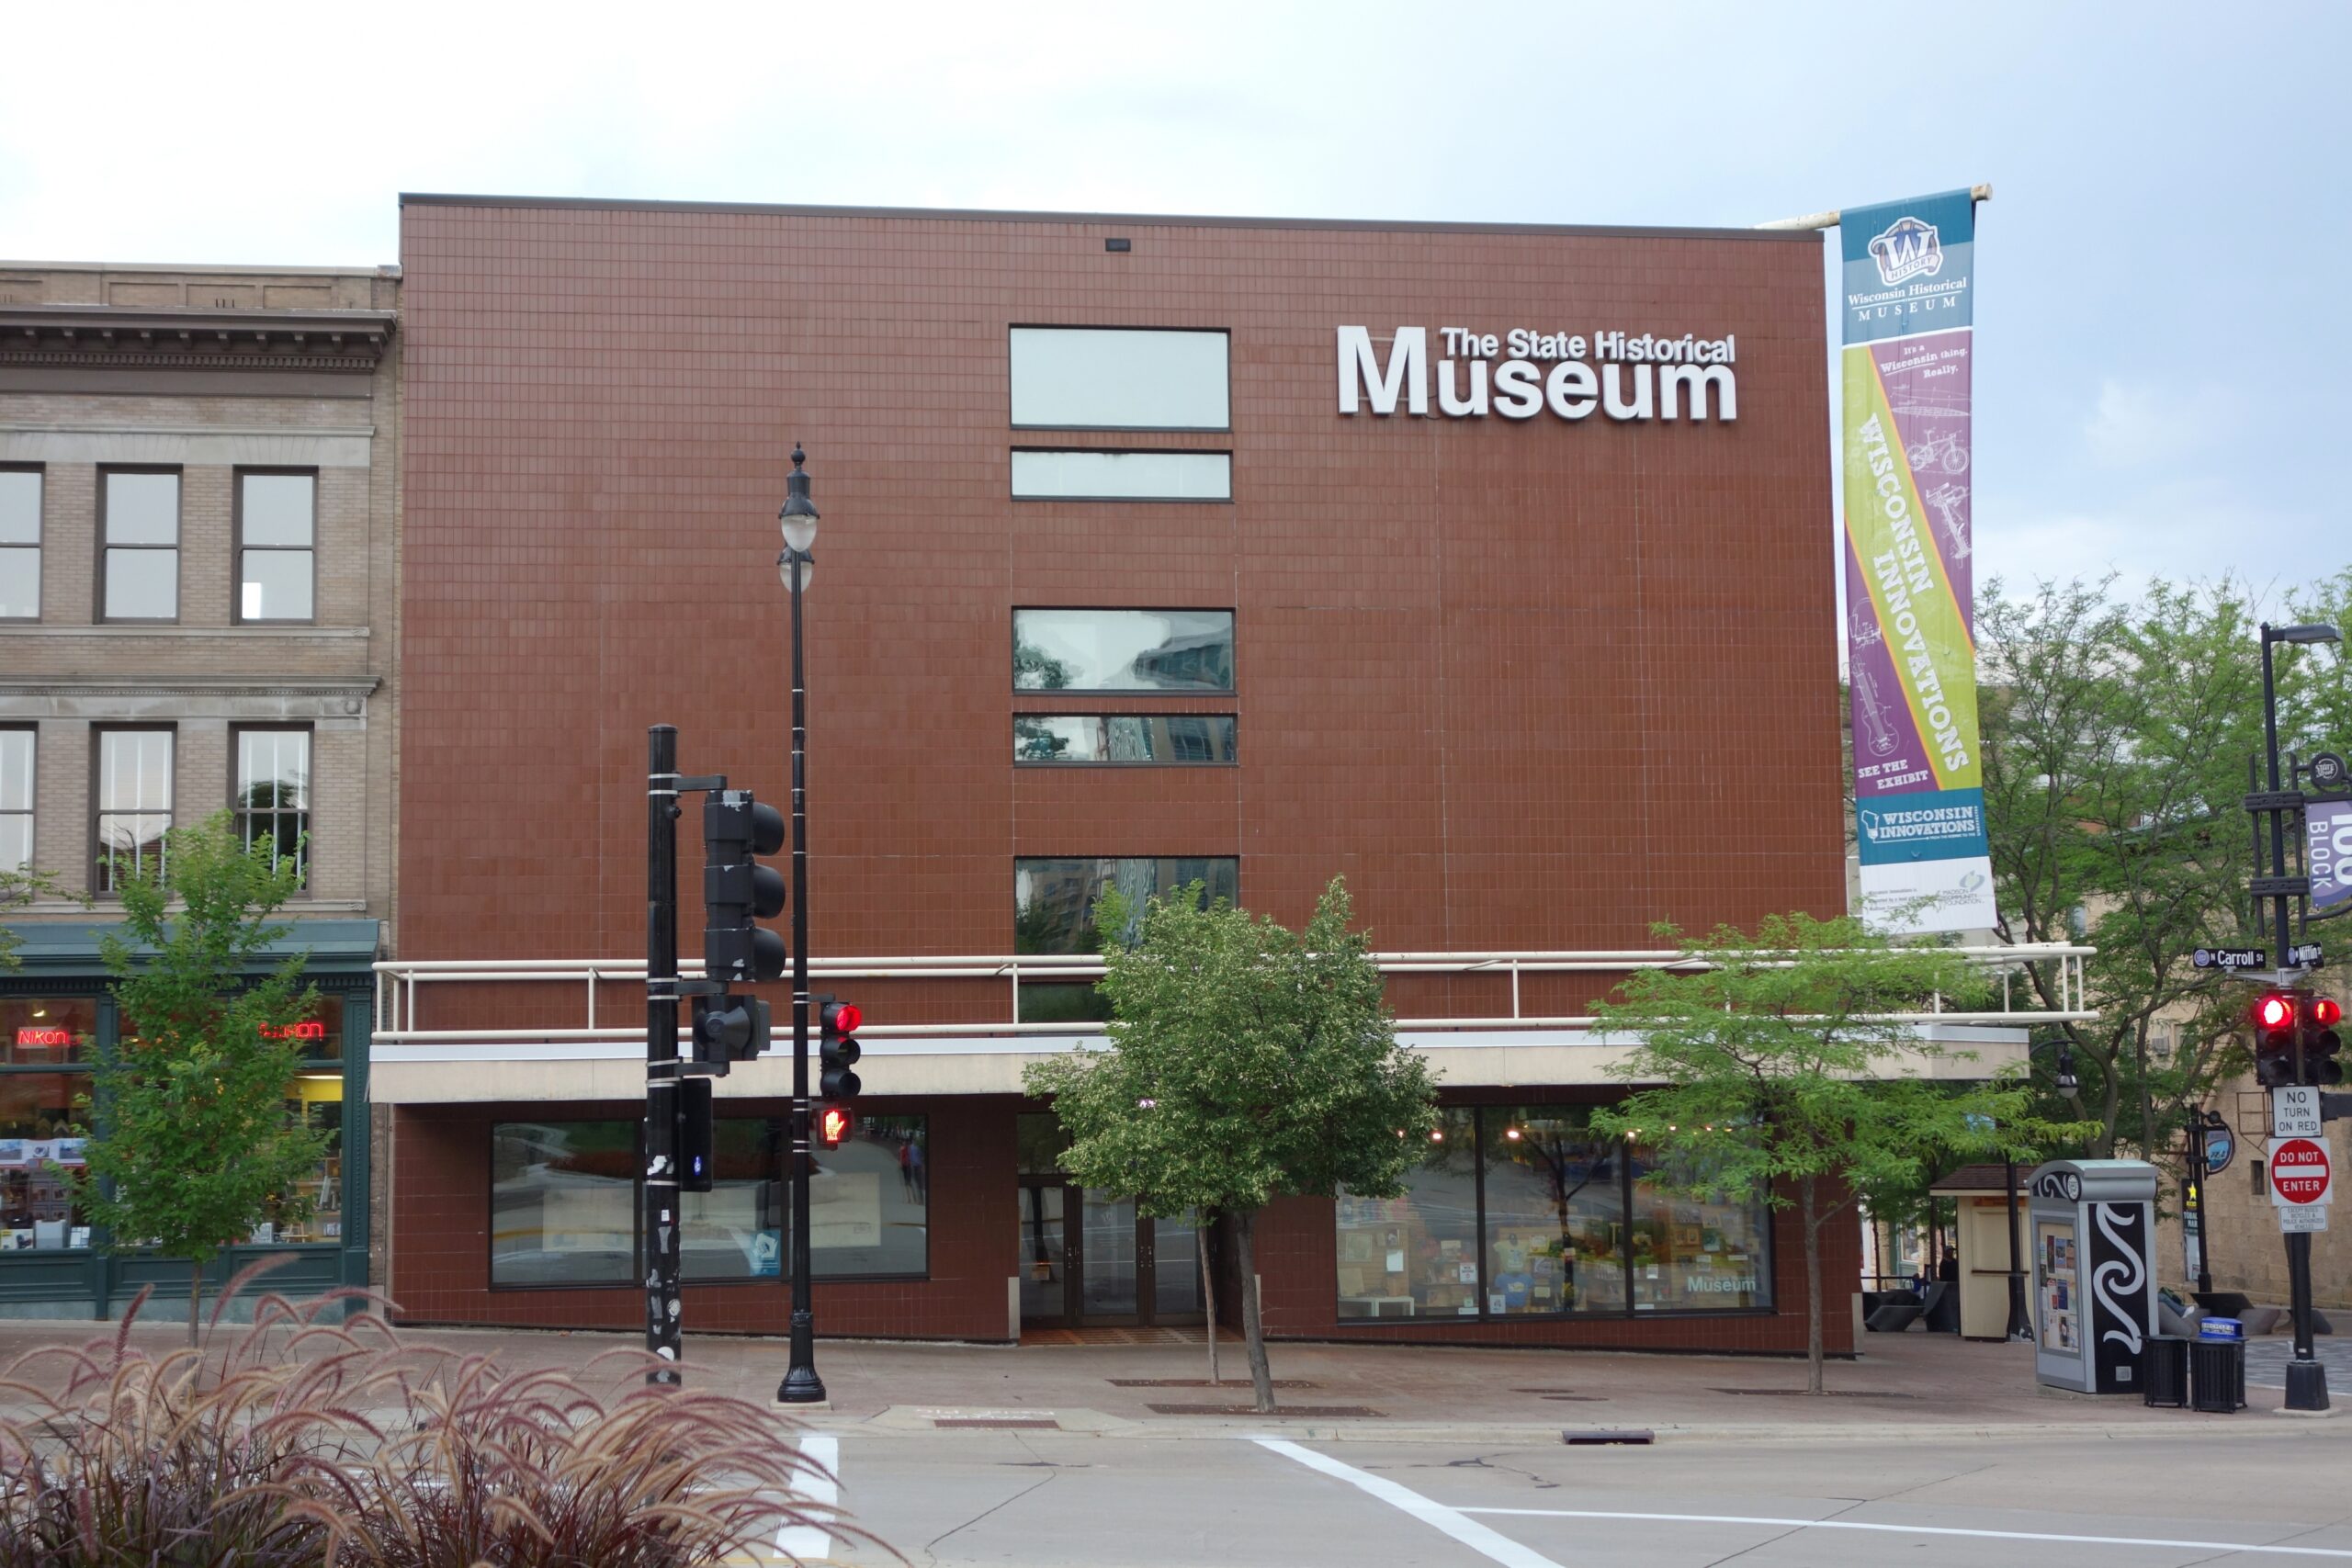 The Wisconsin Historical Museum